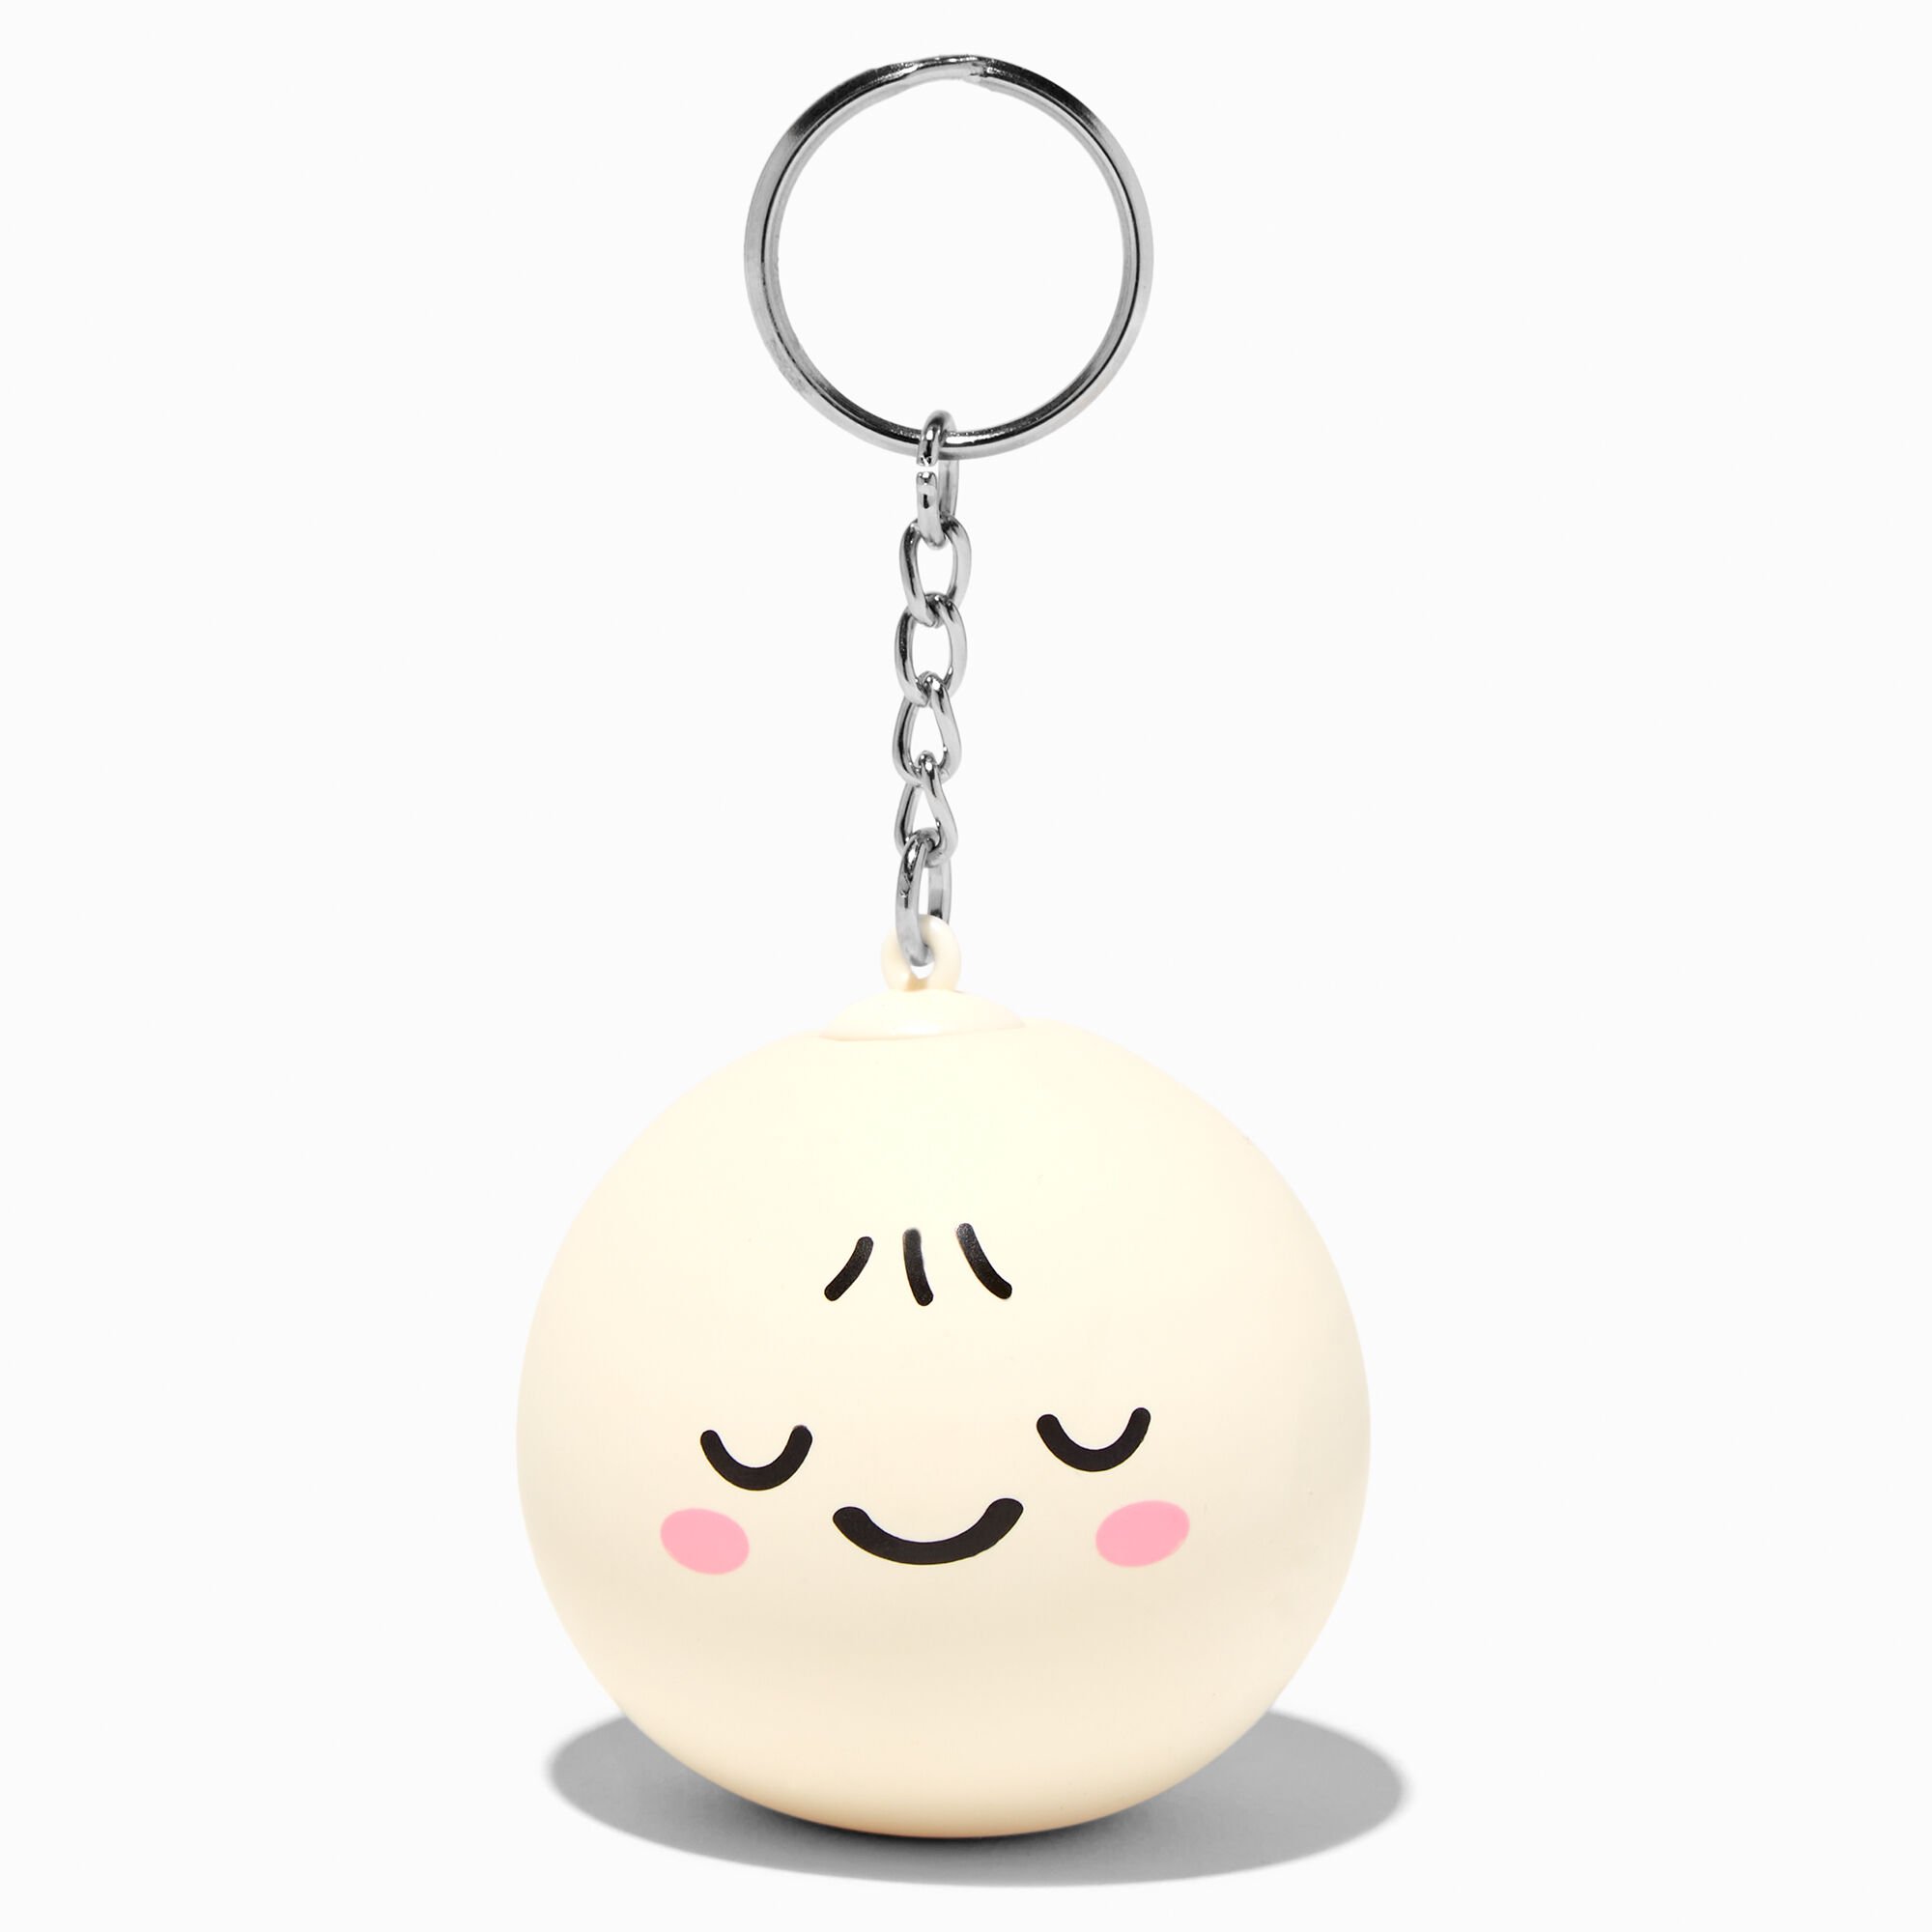 View Claires Dumpling Stress Ball Keyring information